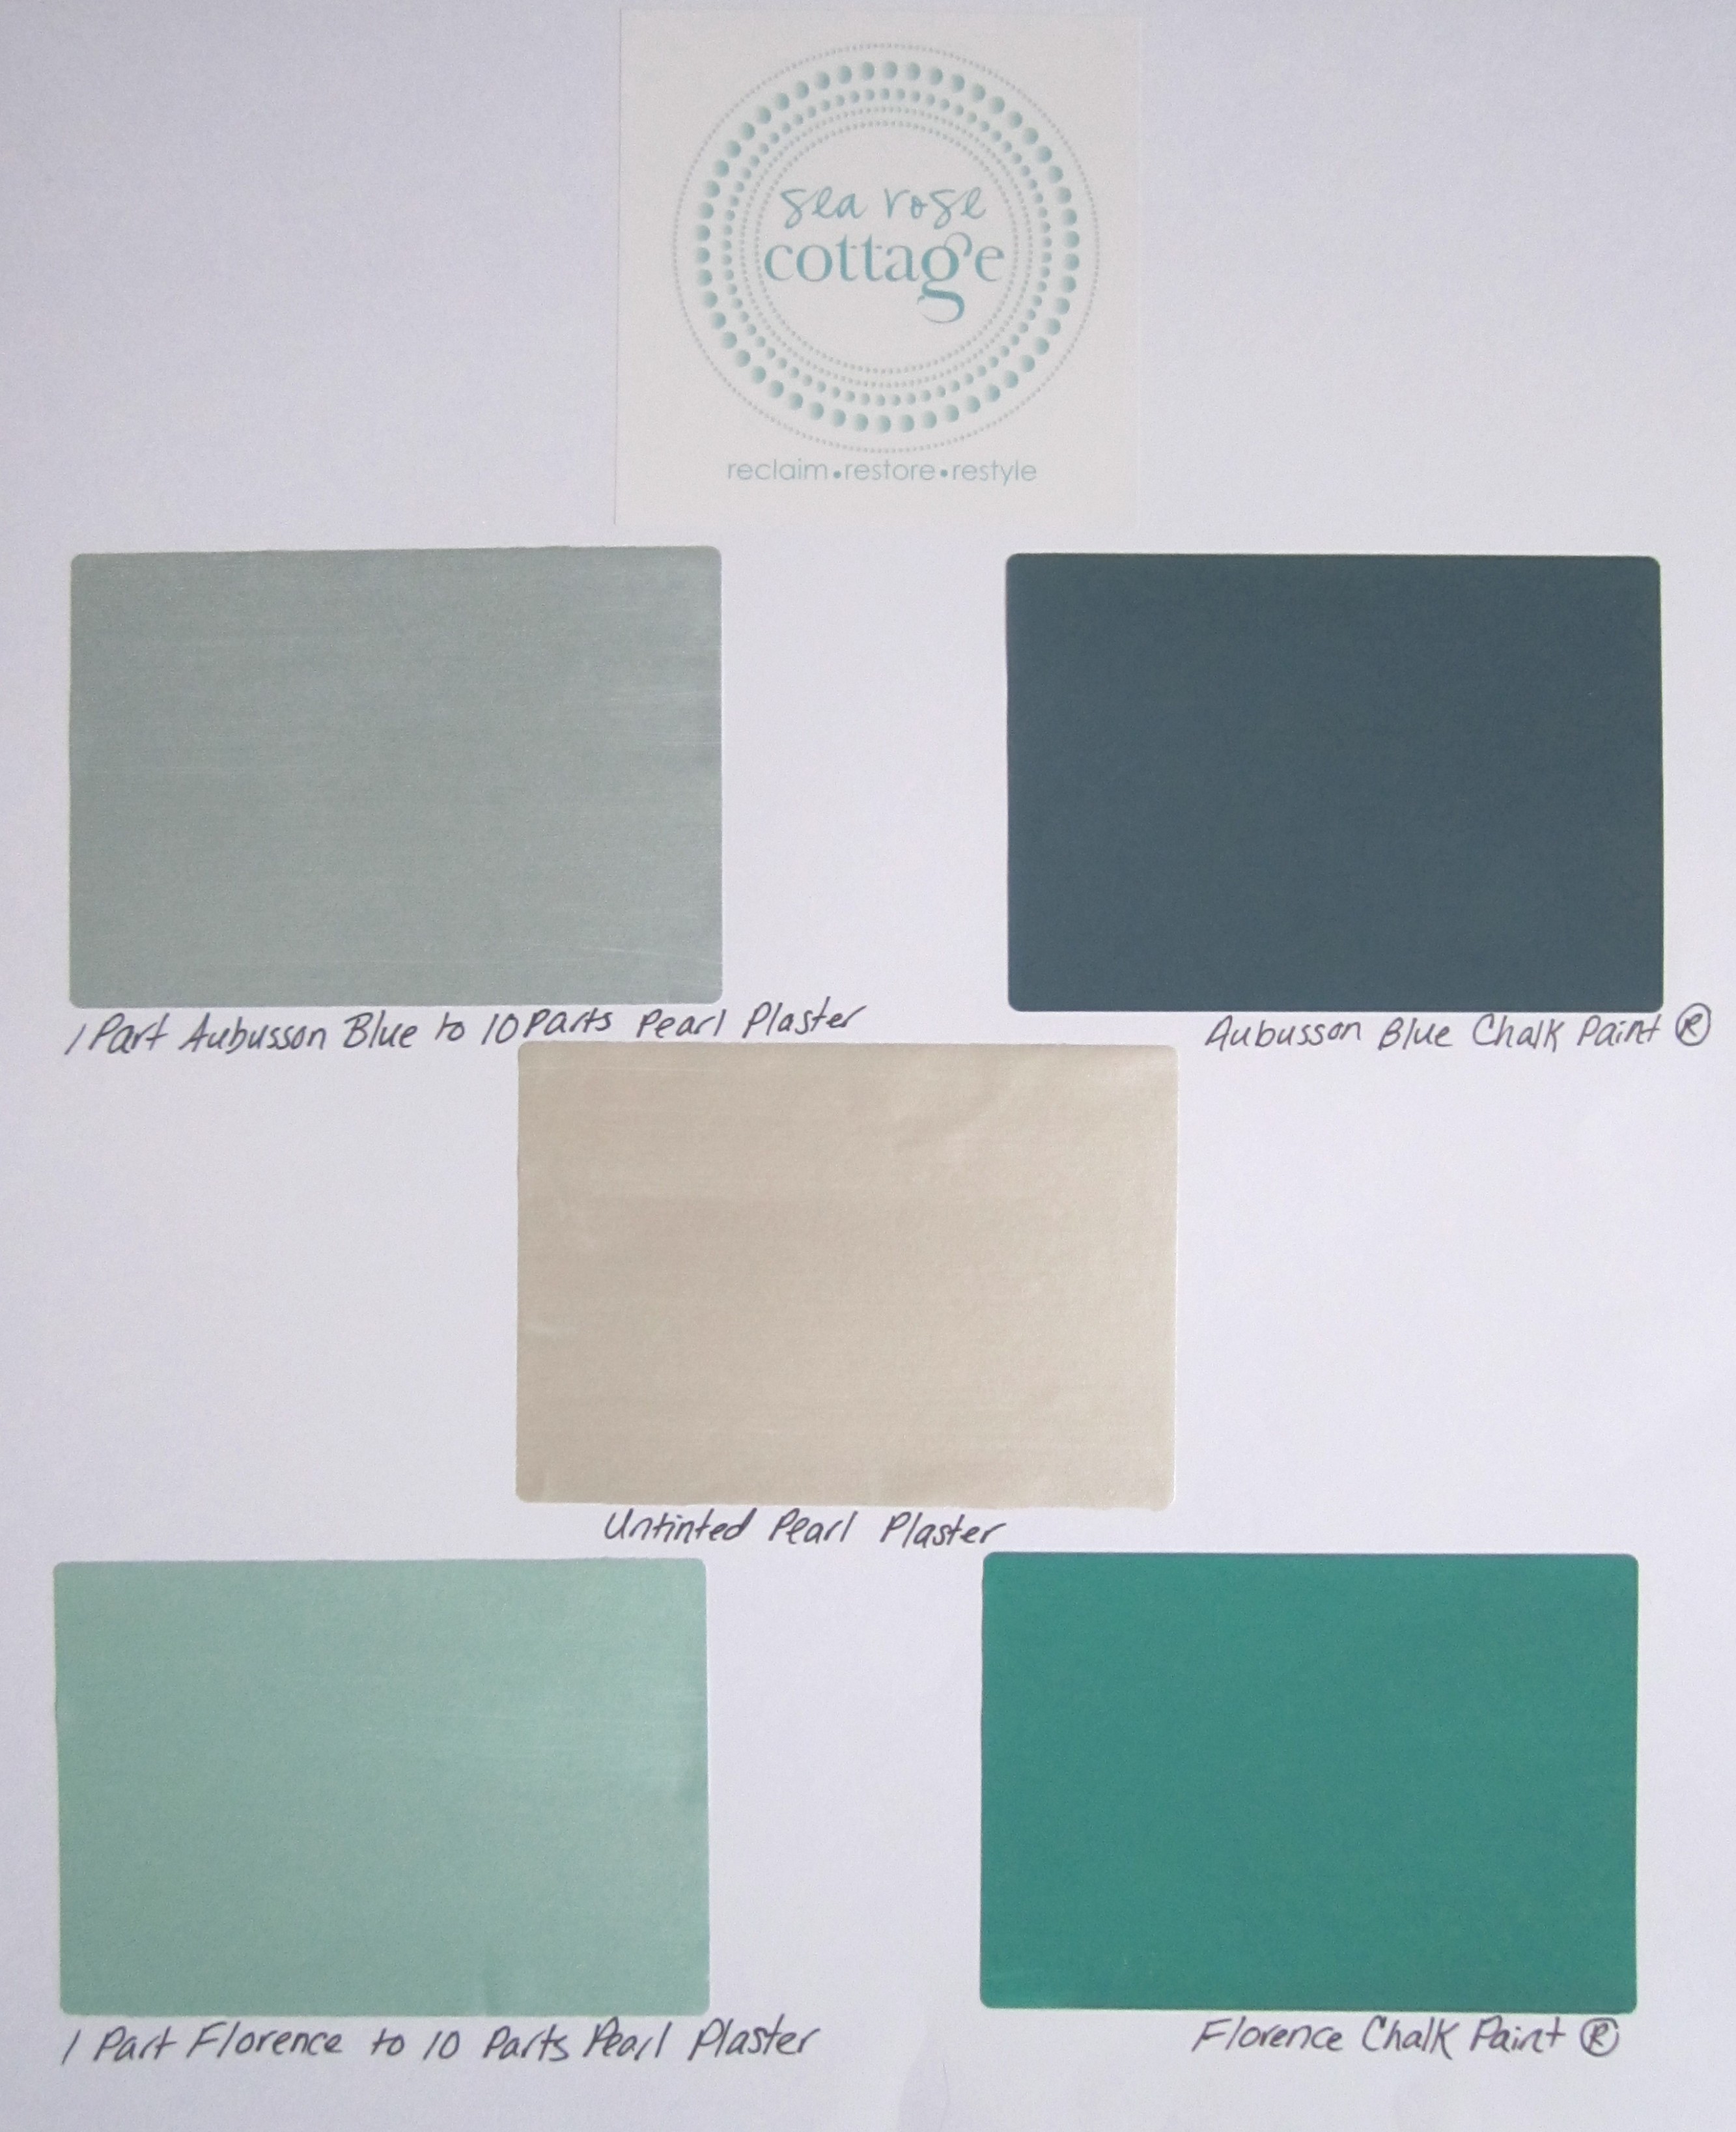 How To Tint Pearl Plaster With Chalk Paint, Tips Annie Sloan Chalk Paint Mixing Colors